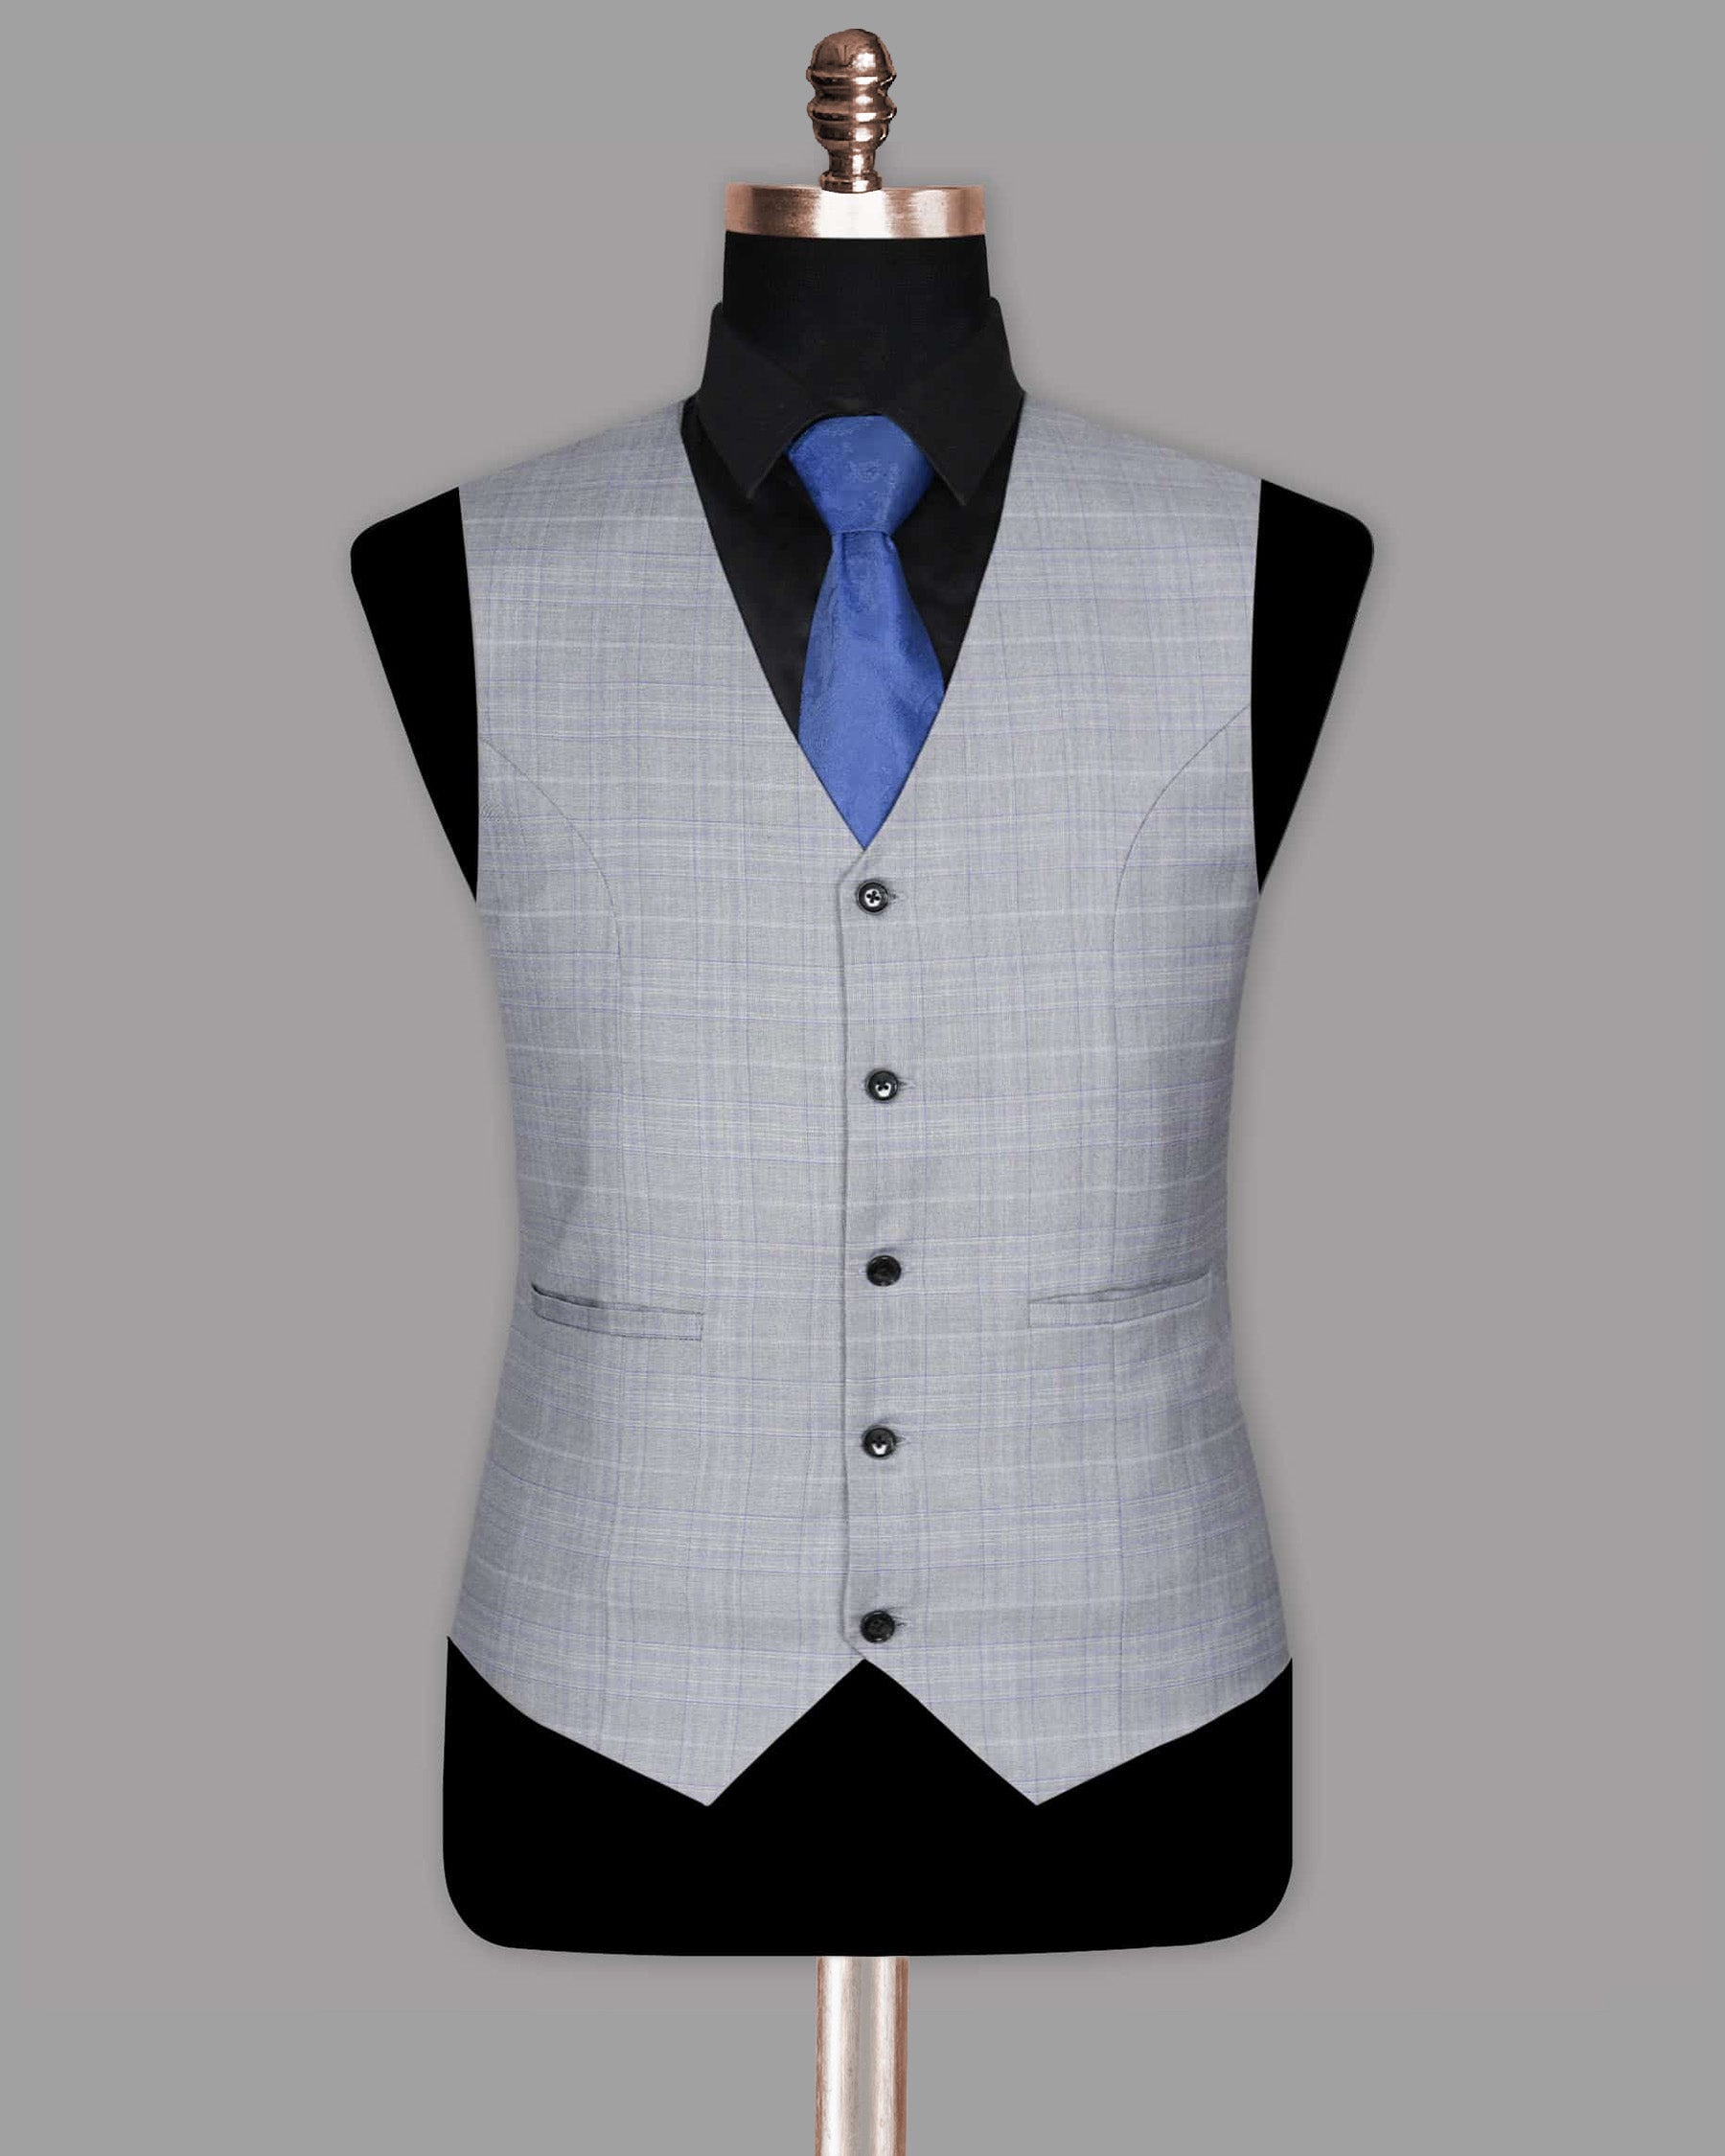 Aluminum Grey with Subtle Purple Checked Waistcoat V1002-48, V1002-52, V1002-60, V1002-38, V1002-46, V1002-36, V1002-40, V1002-42, V1002-44, V1002-54, V1002-56, V1002-58, V1002-50